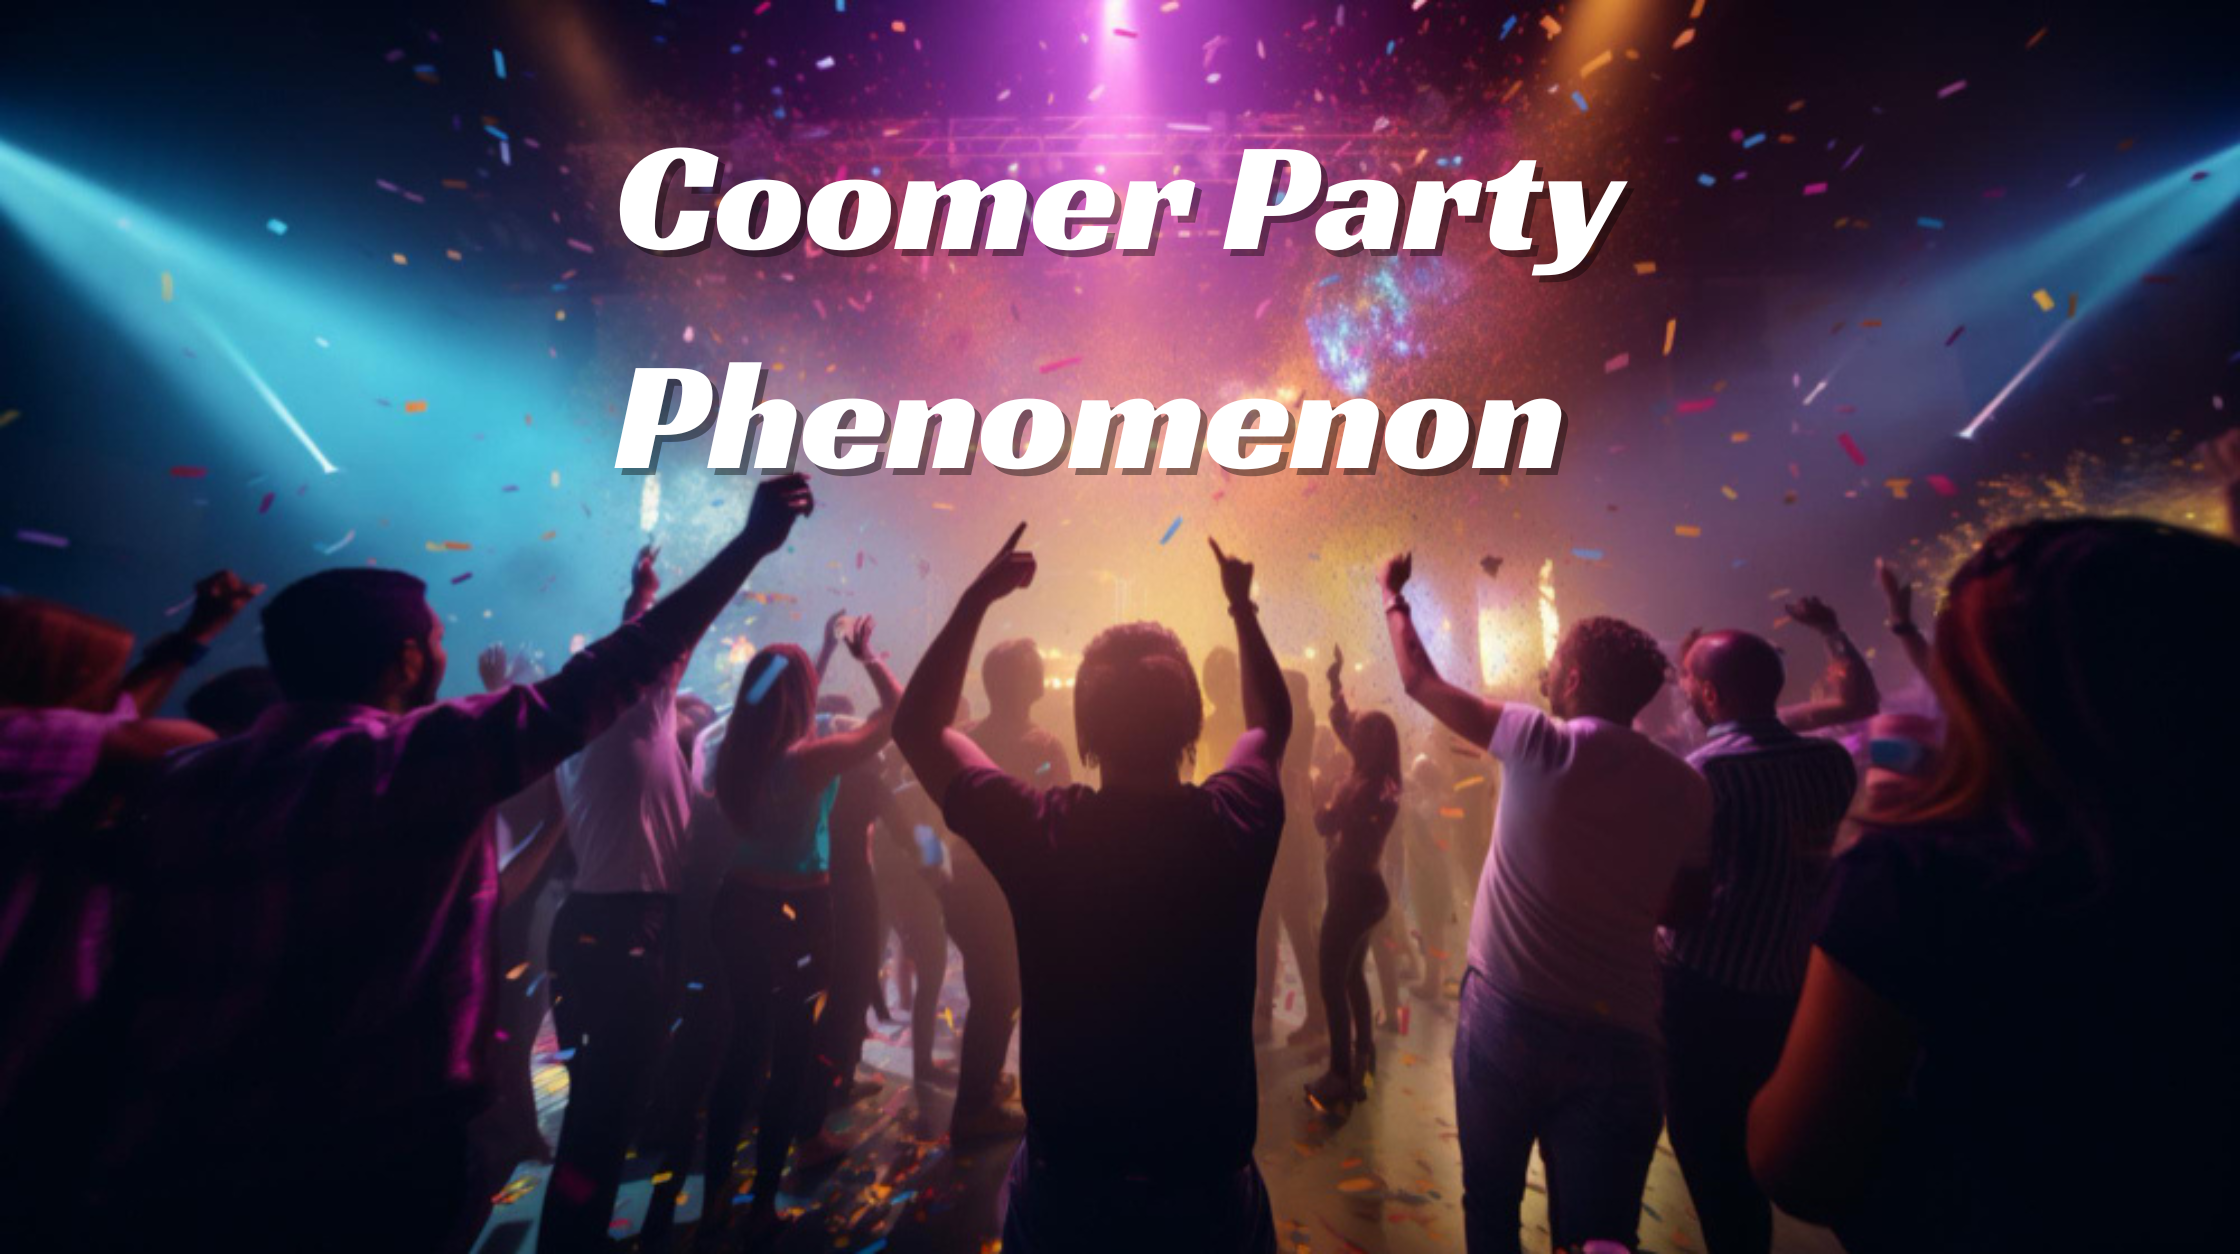 Investigating the Raunchy Underbelly of the Internet: The Coomer Party Phenomenon